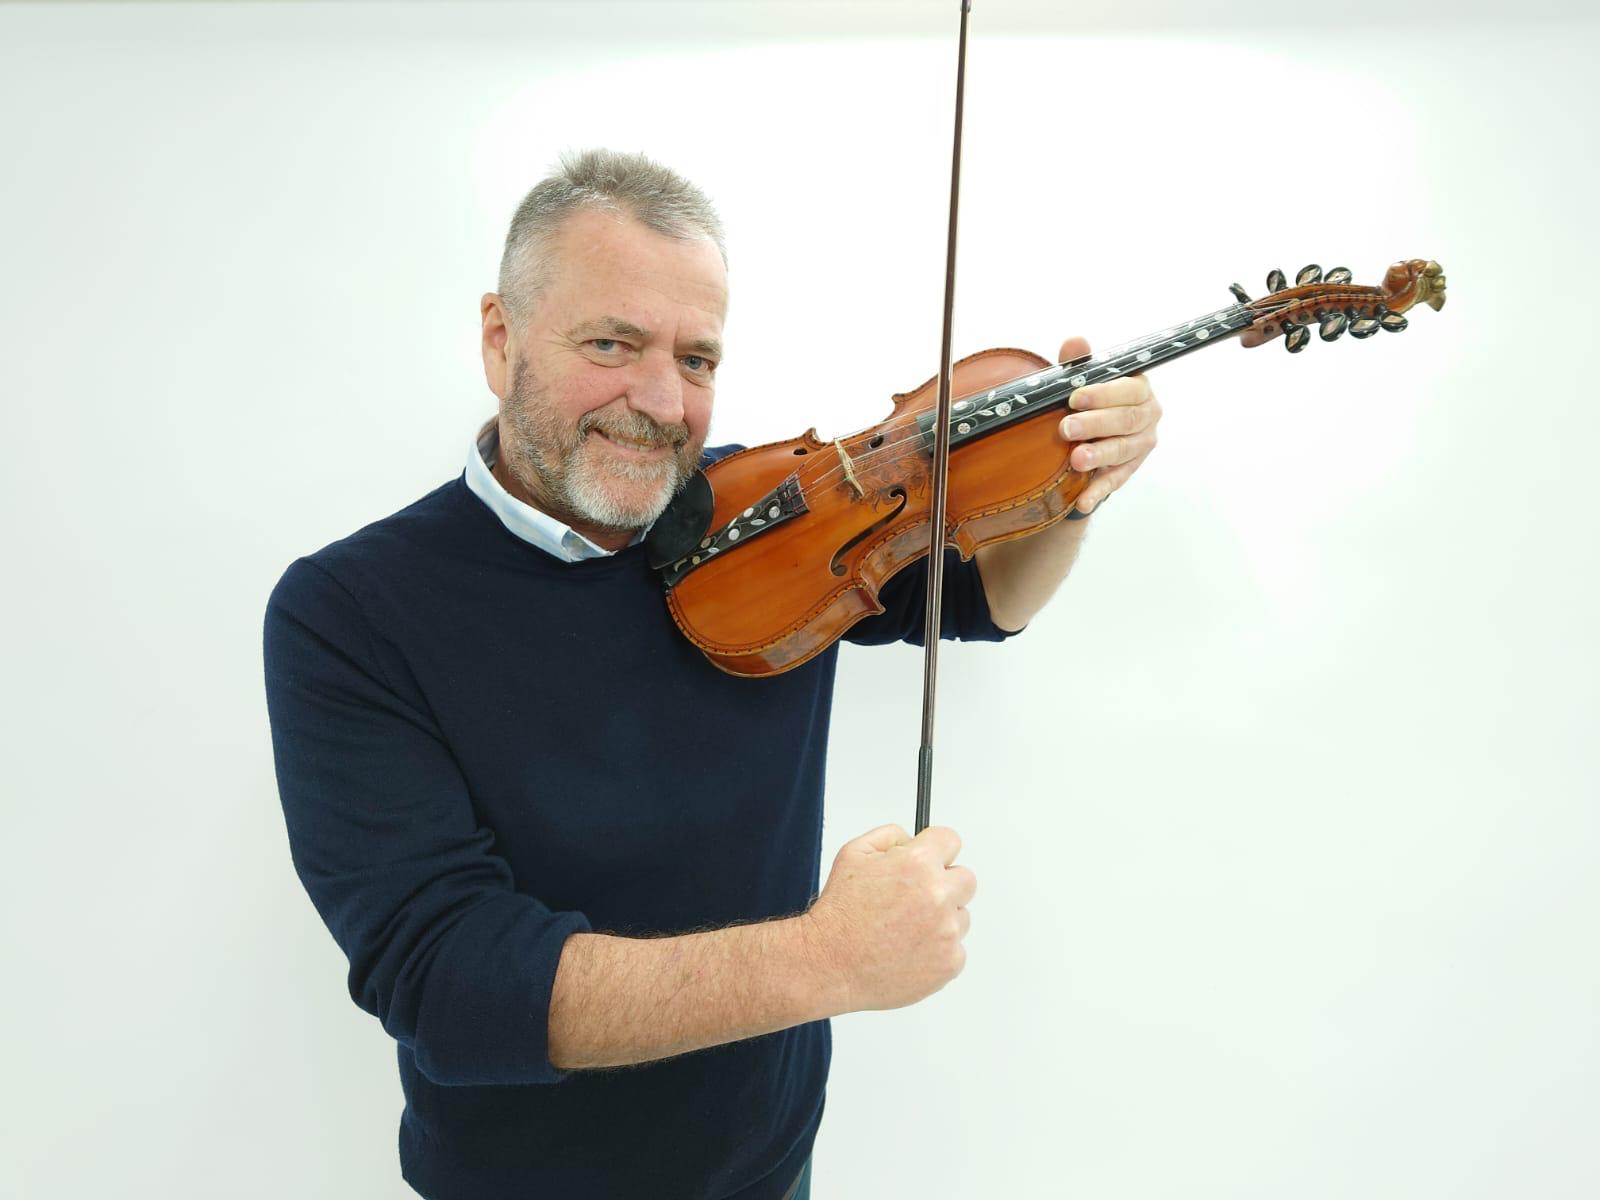 Auctioneer Jamie South with the Lord of the Rings Hardanger violin (Gardiner Houlgate/PA)